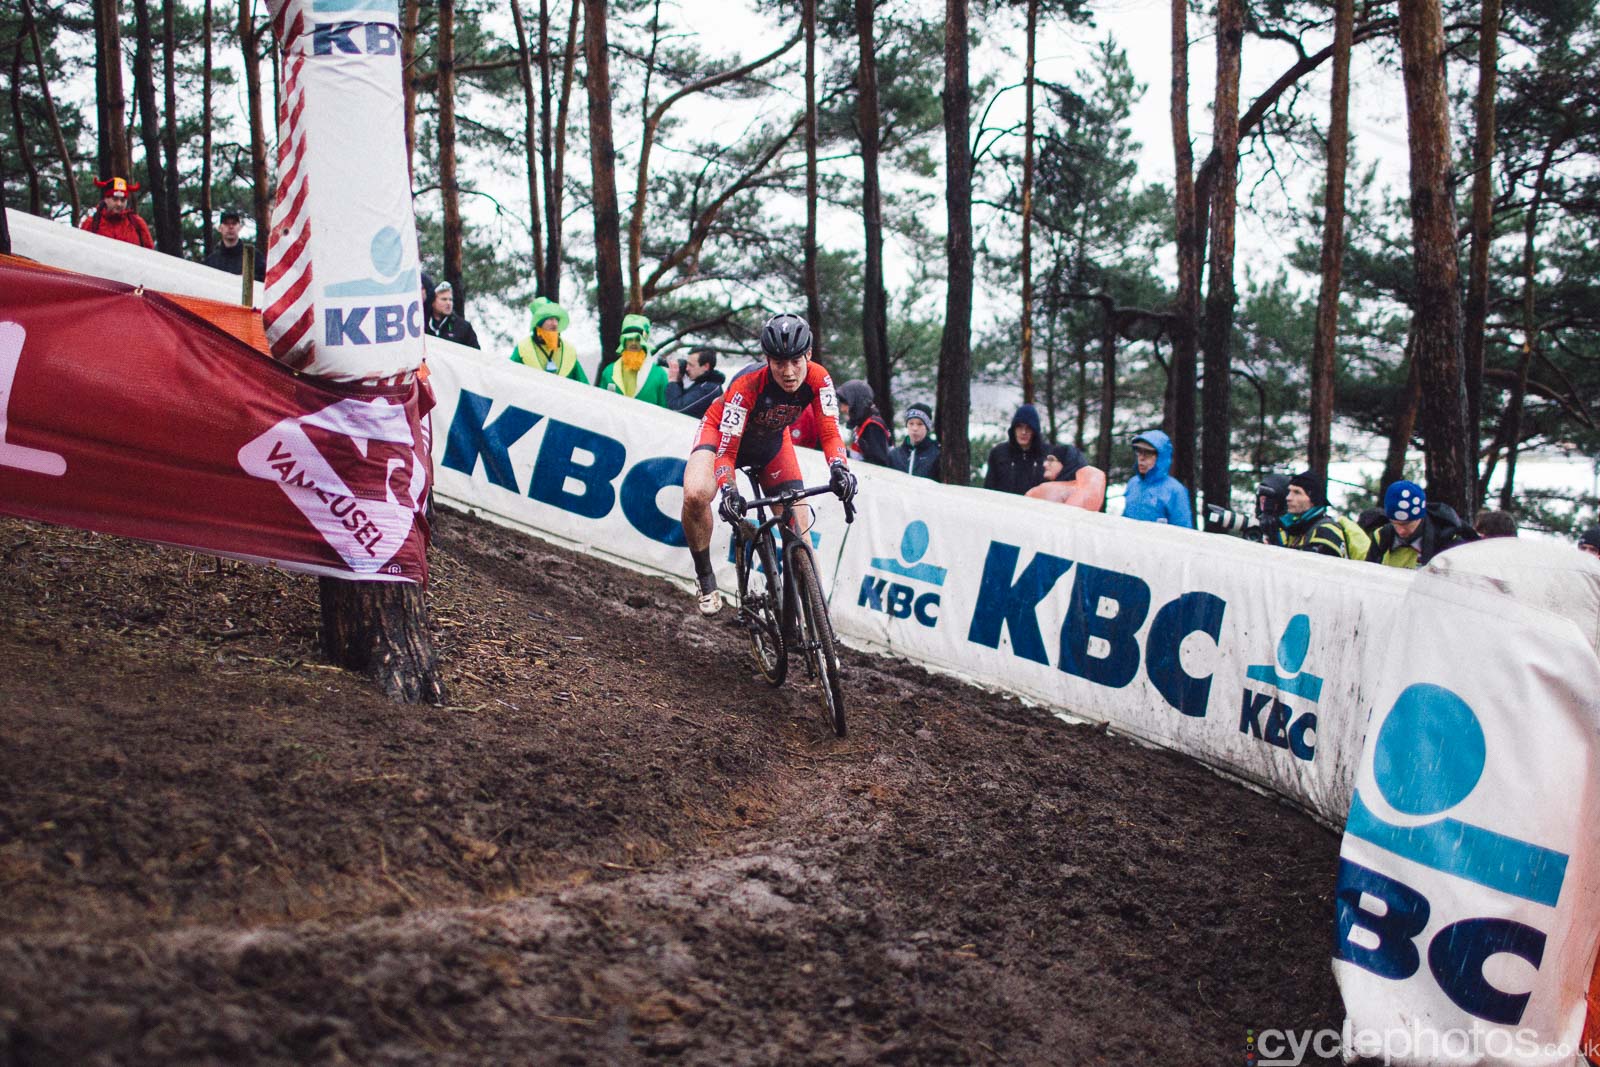 2016-cyclephotos-cyclocross-world-championships-zolder-153116-elle-anderson